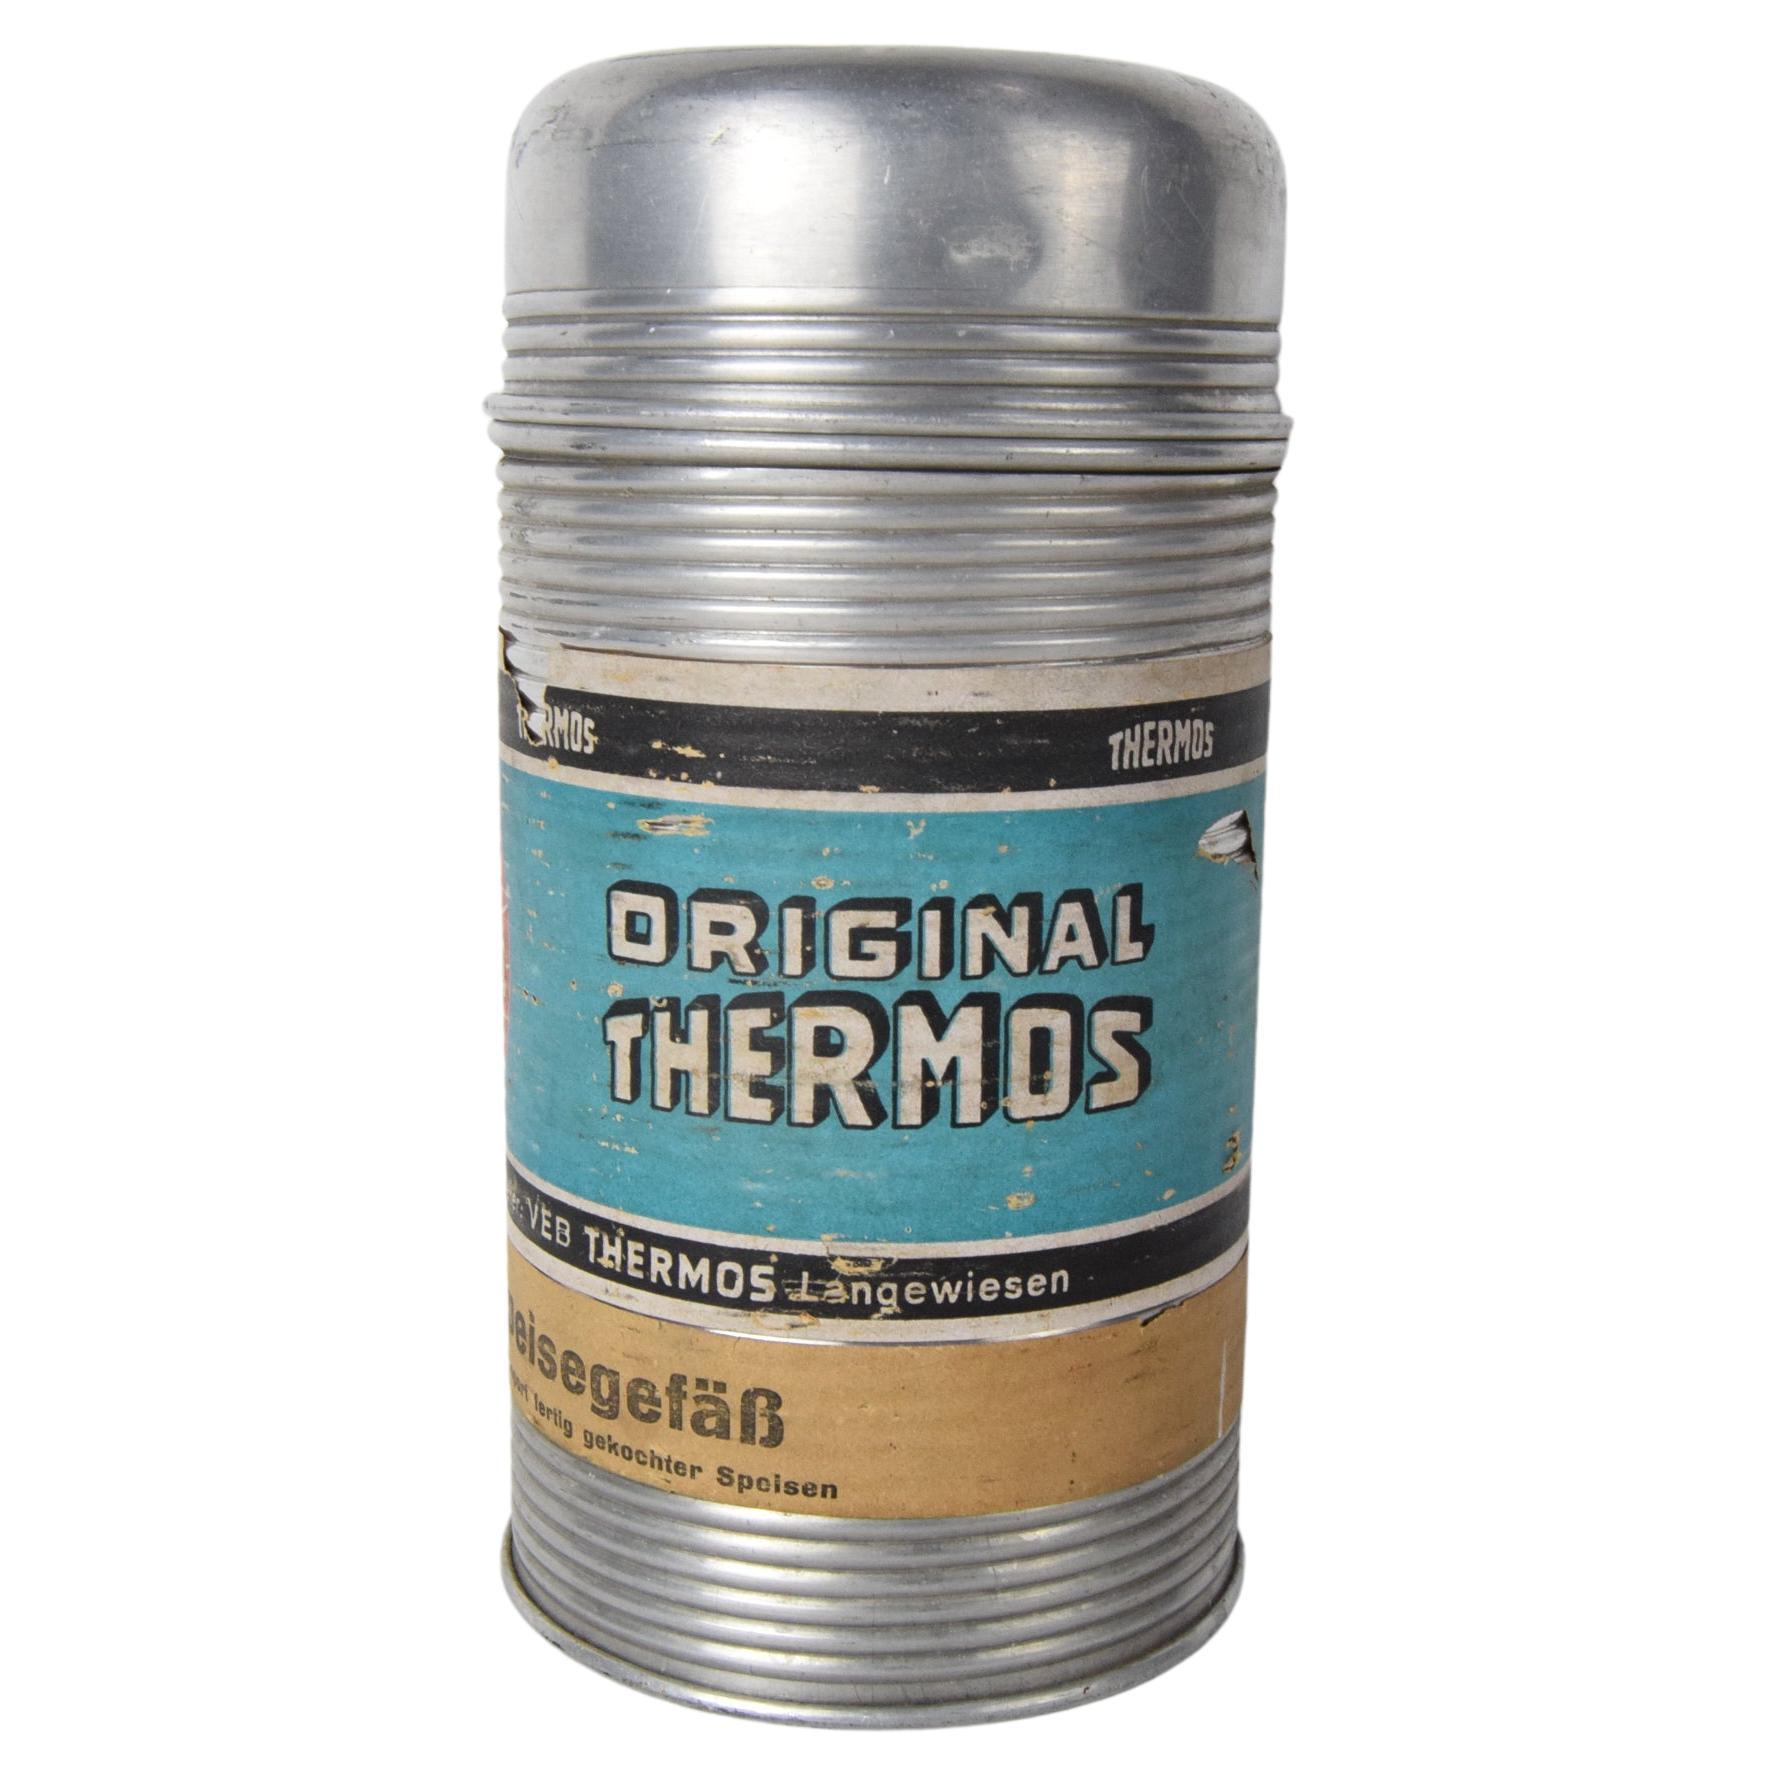 Aluminum Thermos from Veb Thermos Langewiesen, circa 1940's. For Sale